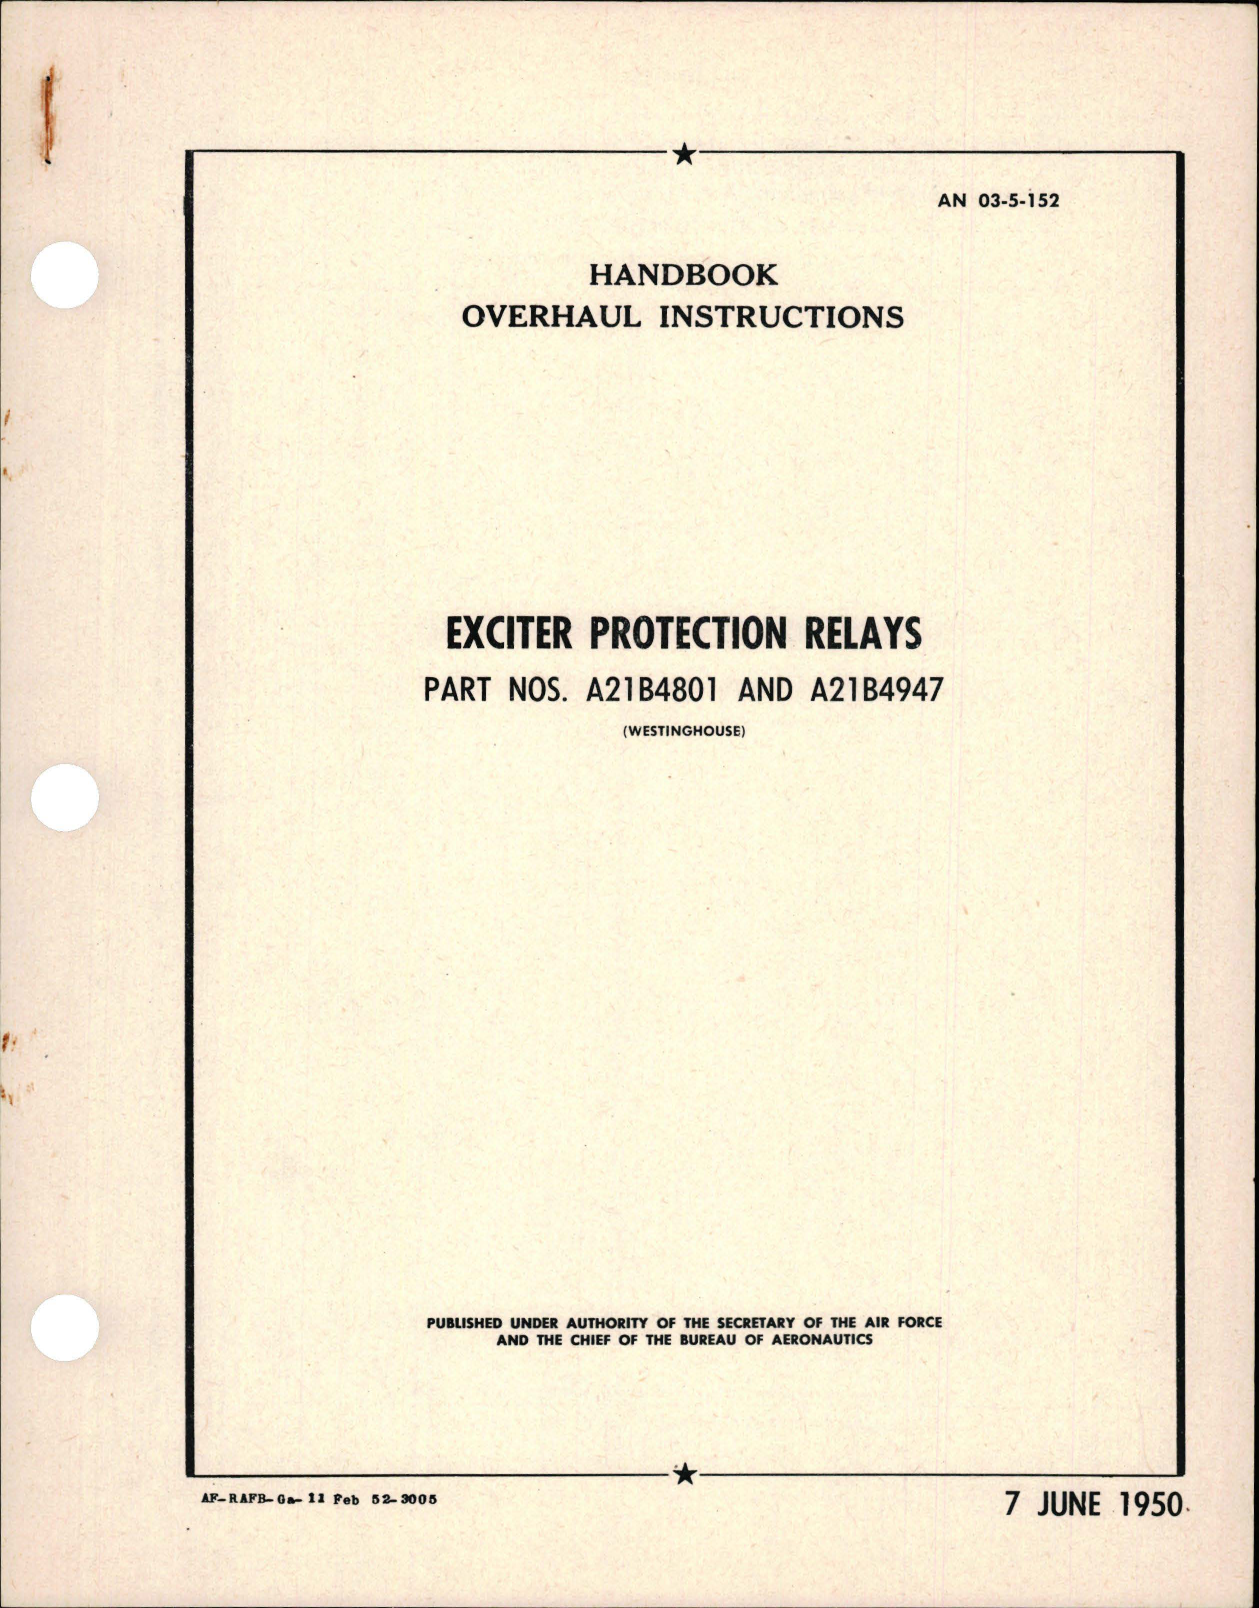 Sample page 1 from AirCorps Library document: Overhaul Instructions for Exciter Protection Relays - Parts A21B4801 and A21B4947